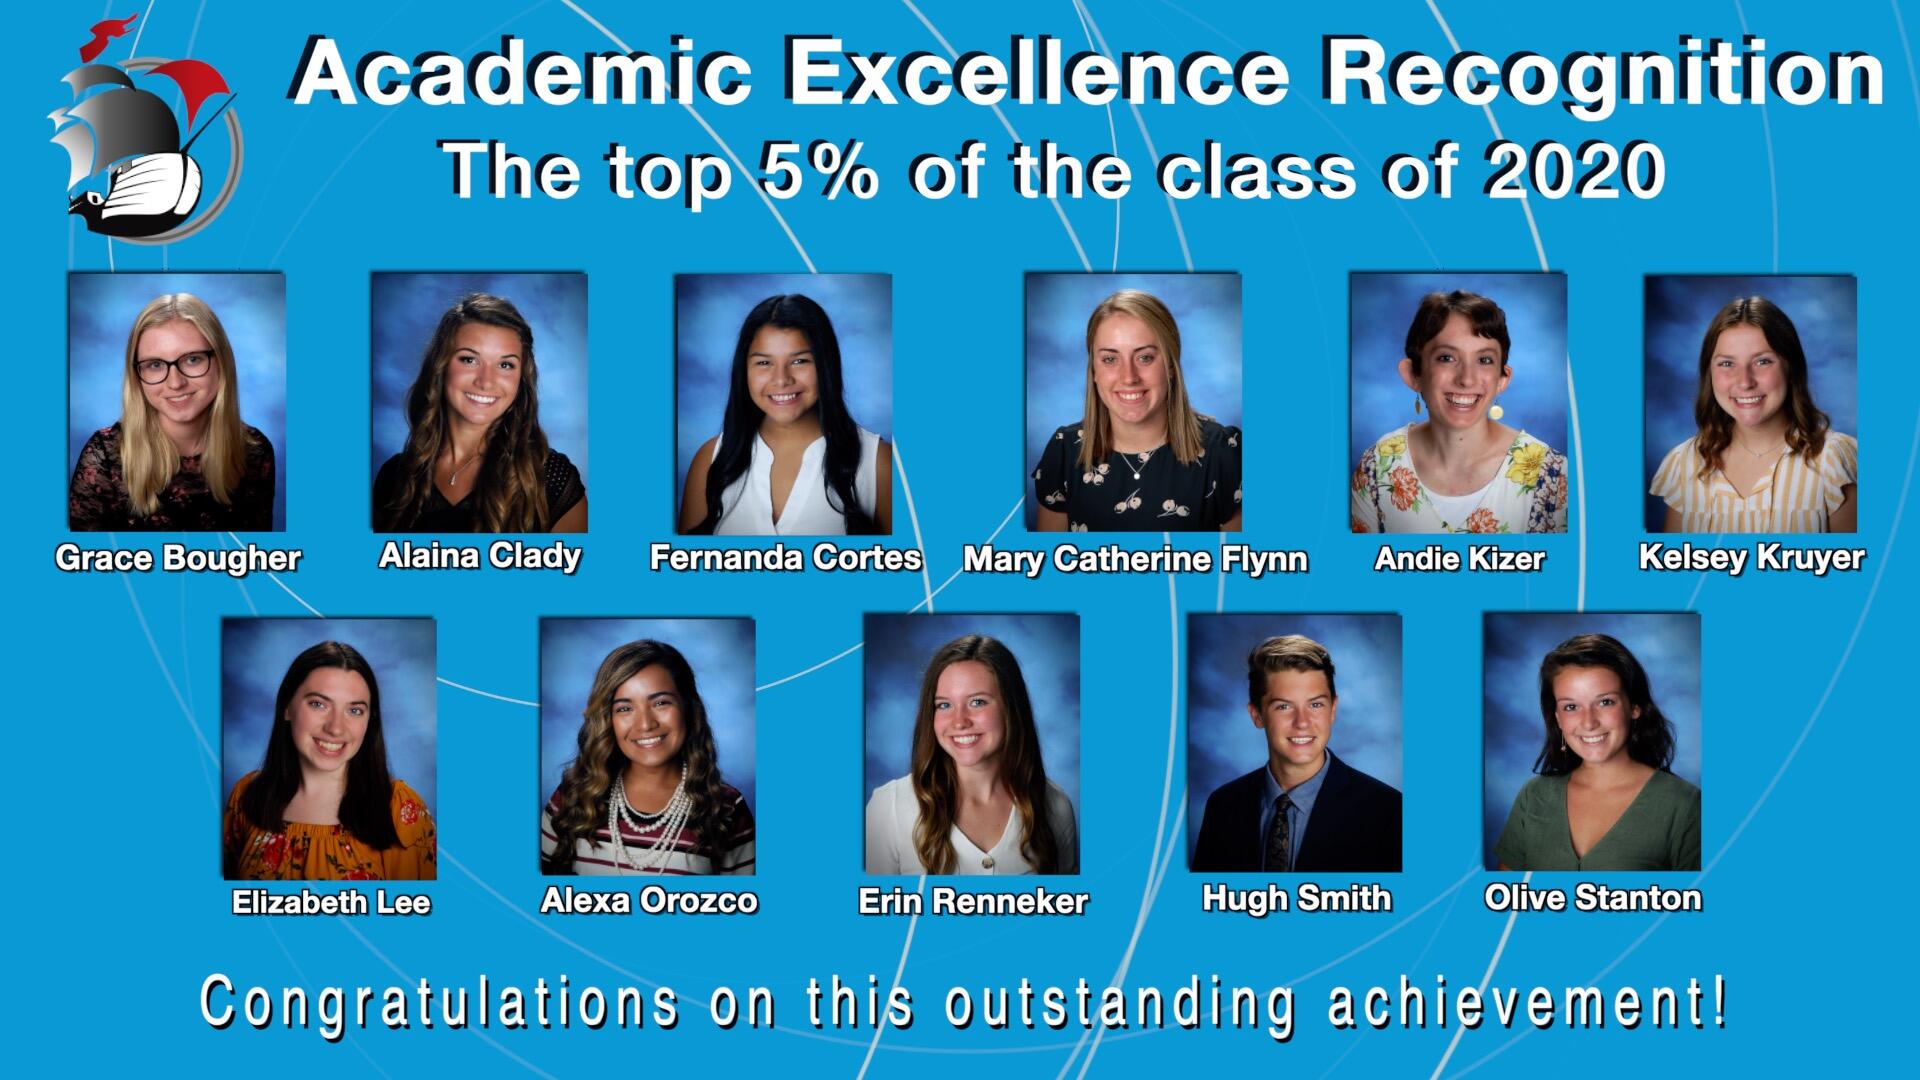 Academic Recognition-The top 5% of the class of 2020-student pictures and names-Congratulations on this outstanding achievement!